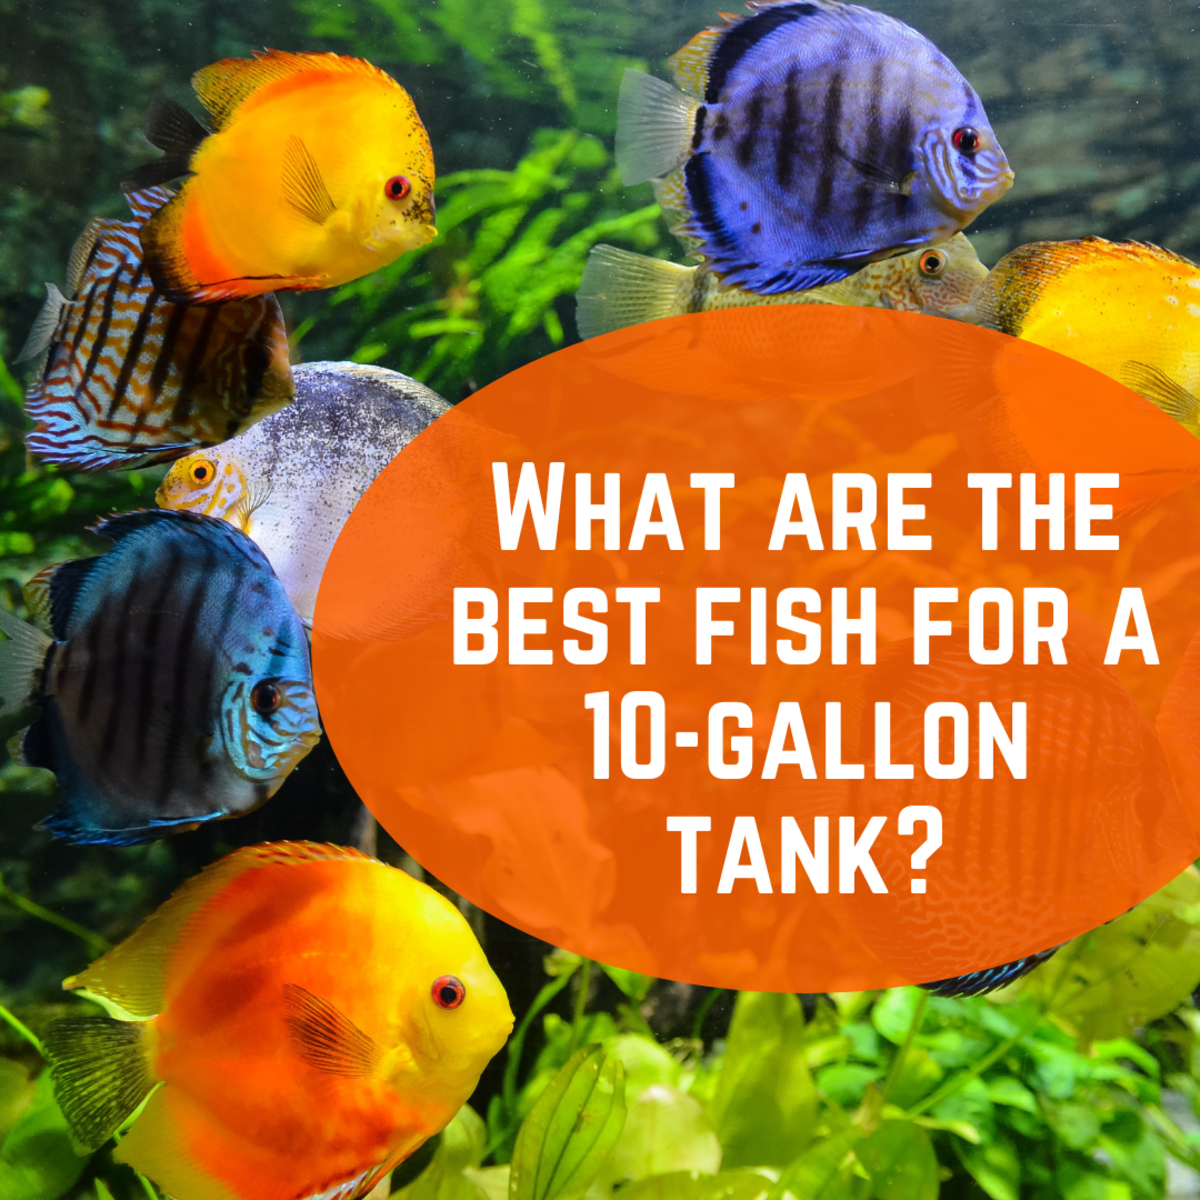 Find out which fish to choose for your 10-gallon tank, how many fish to stock and more!